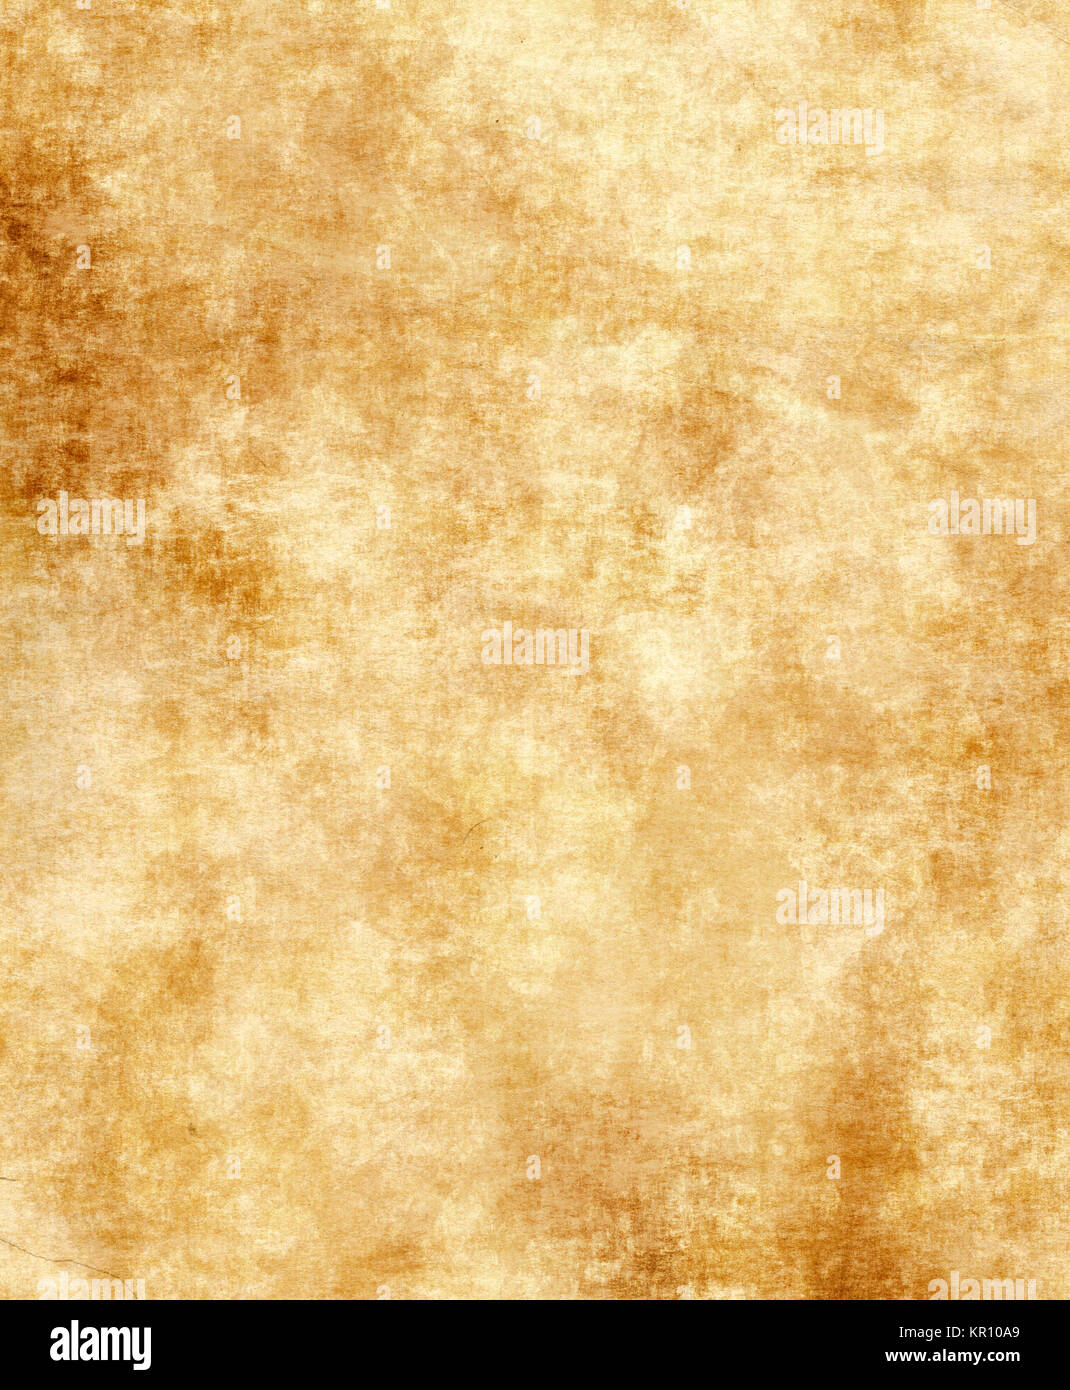 Old dirty paper background. Natural old paper texture for the design. Stock Photo